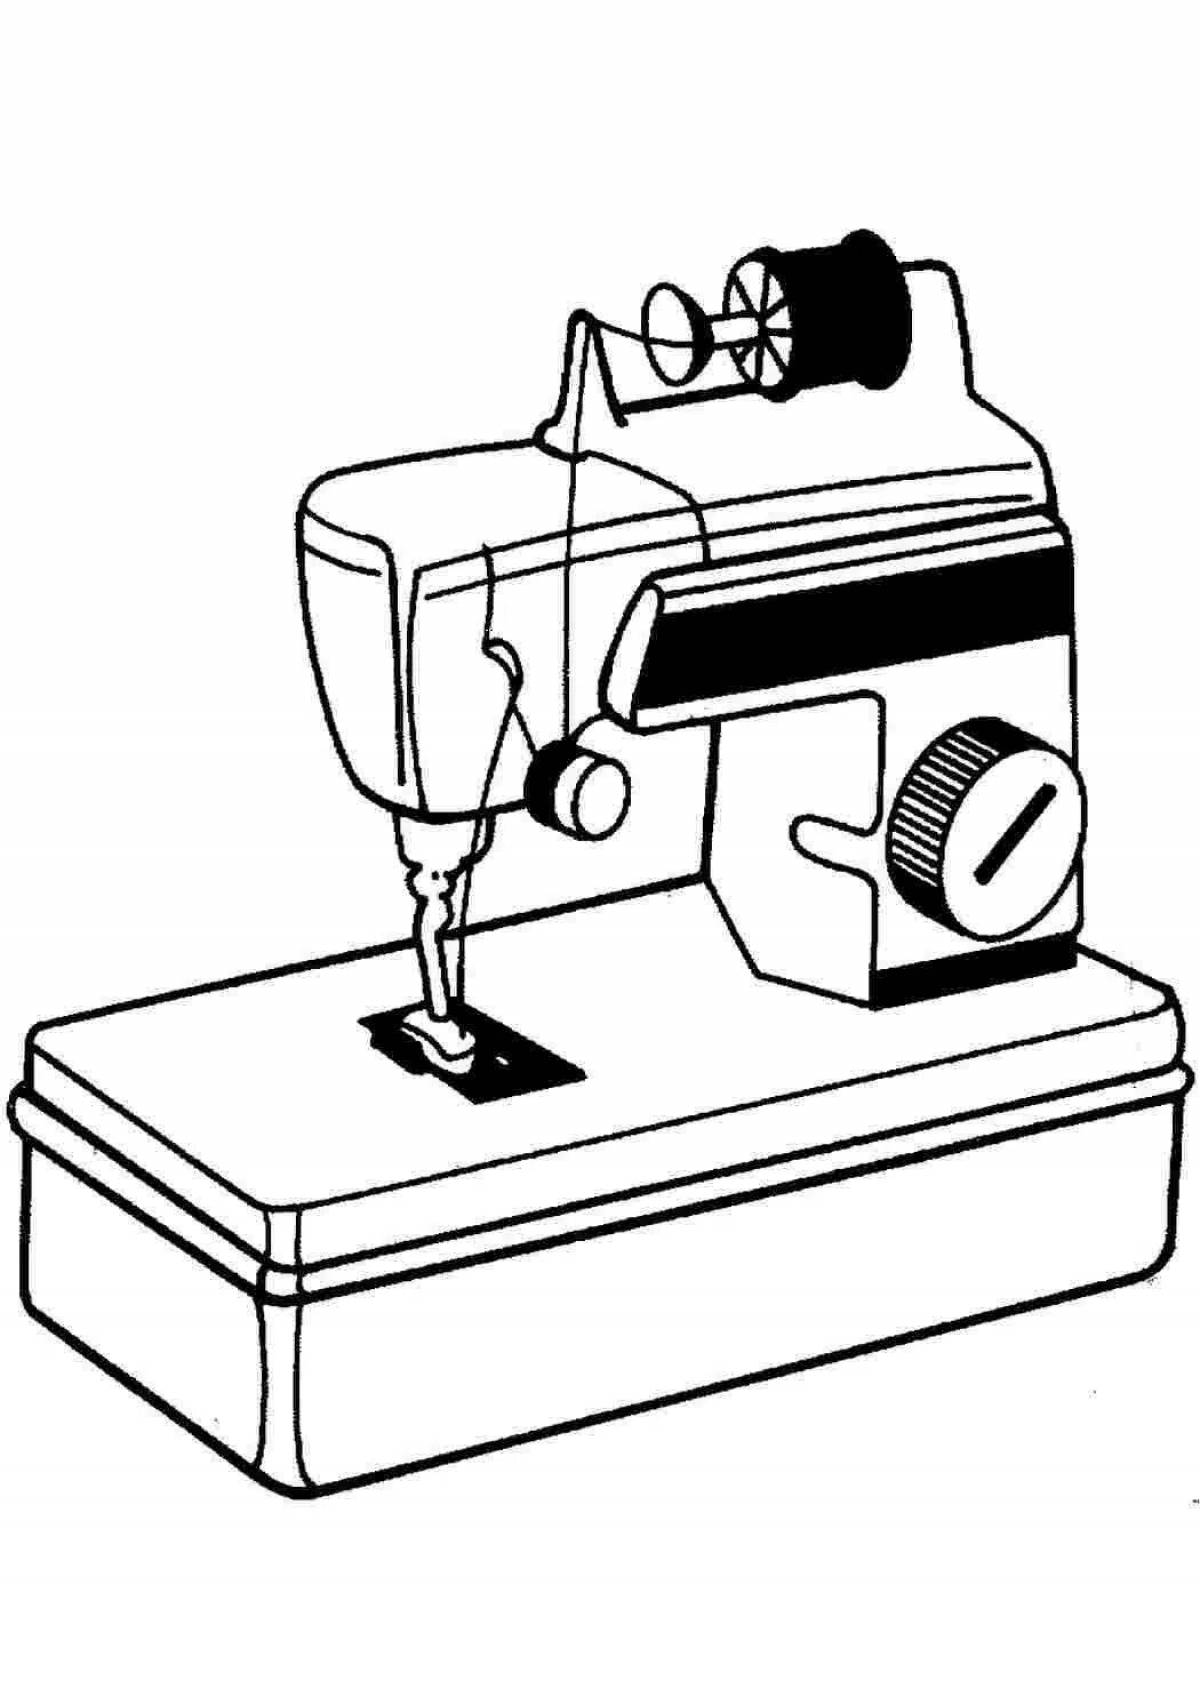 Funny sewing machine coloring page